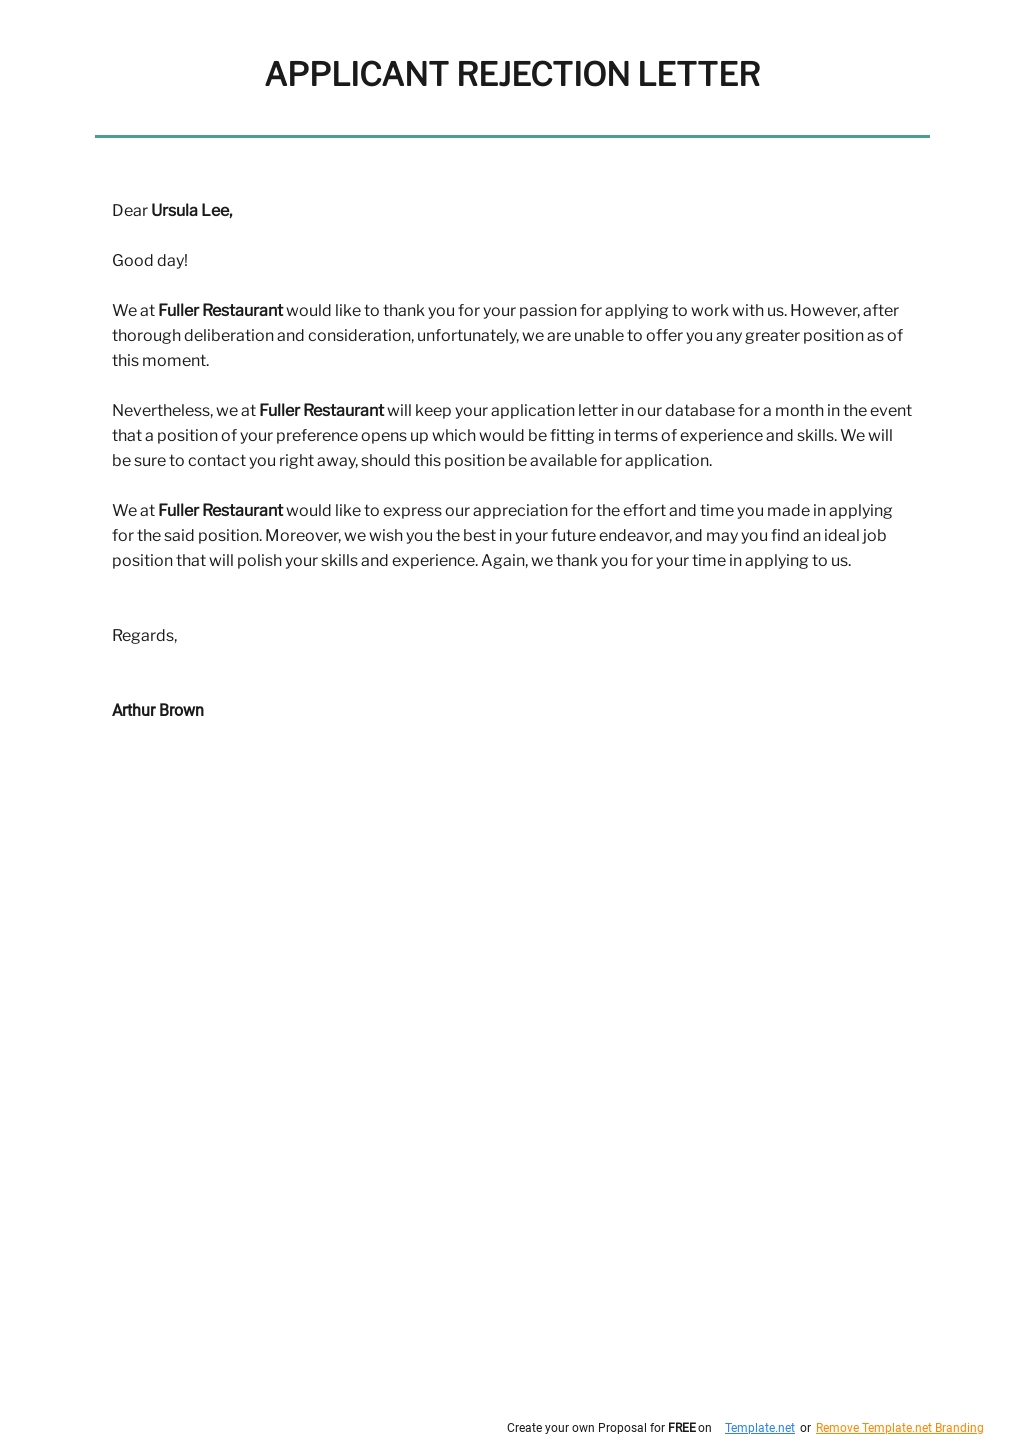 Applicant Rejection Letter Template.jpe